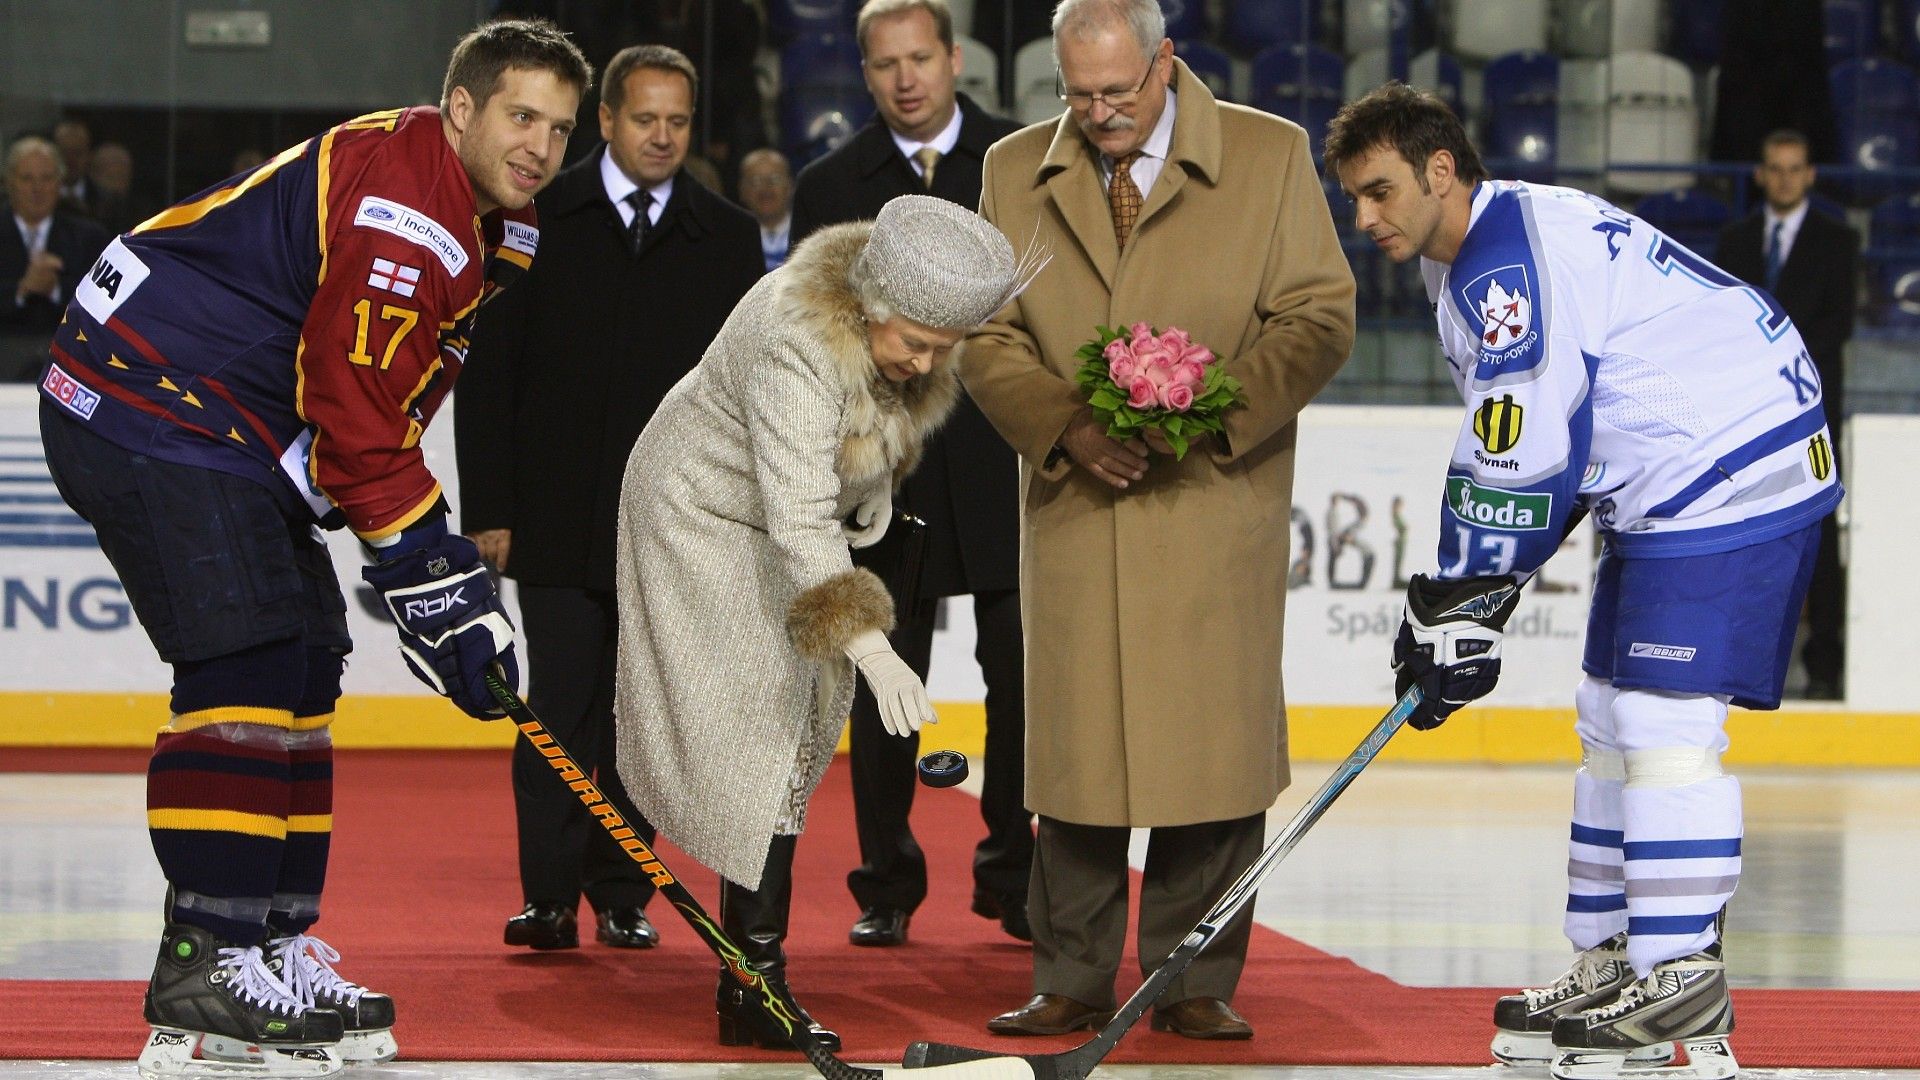 <p>                     In 2008, the Queen and Prince Philip paid a visit to Central Europe, embarking on a days-long tour of Slovakia and Slovenia in October of that year.                   </p>                                      <p>                     One of the best moments was during the couple’s last day of their visit to Slovakia when they attended an ice hockey game between Guildford Flames and the Aquacity Poprad.                   </p>                                      <p>                     Not only did the monarch look chic in a hat and a coat with a faux fur lining, but she also kicked off the game by ceremonially dropping the puck, alongside Slovakia’s Prime Minister.                   </p>